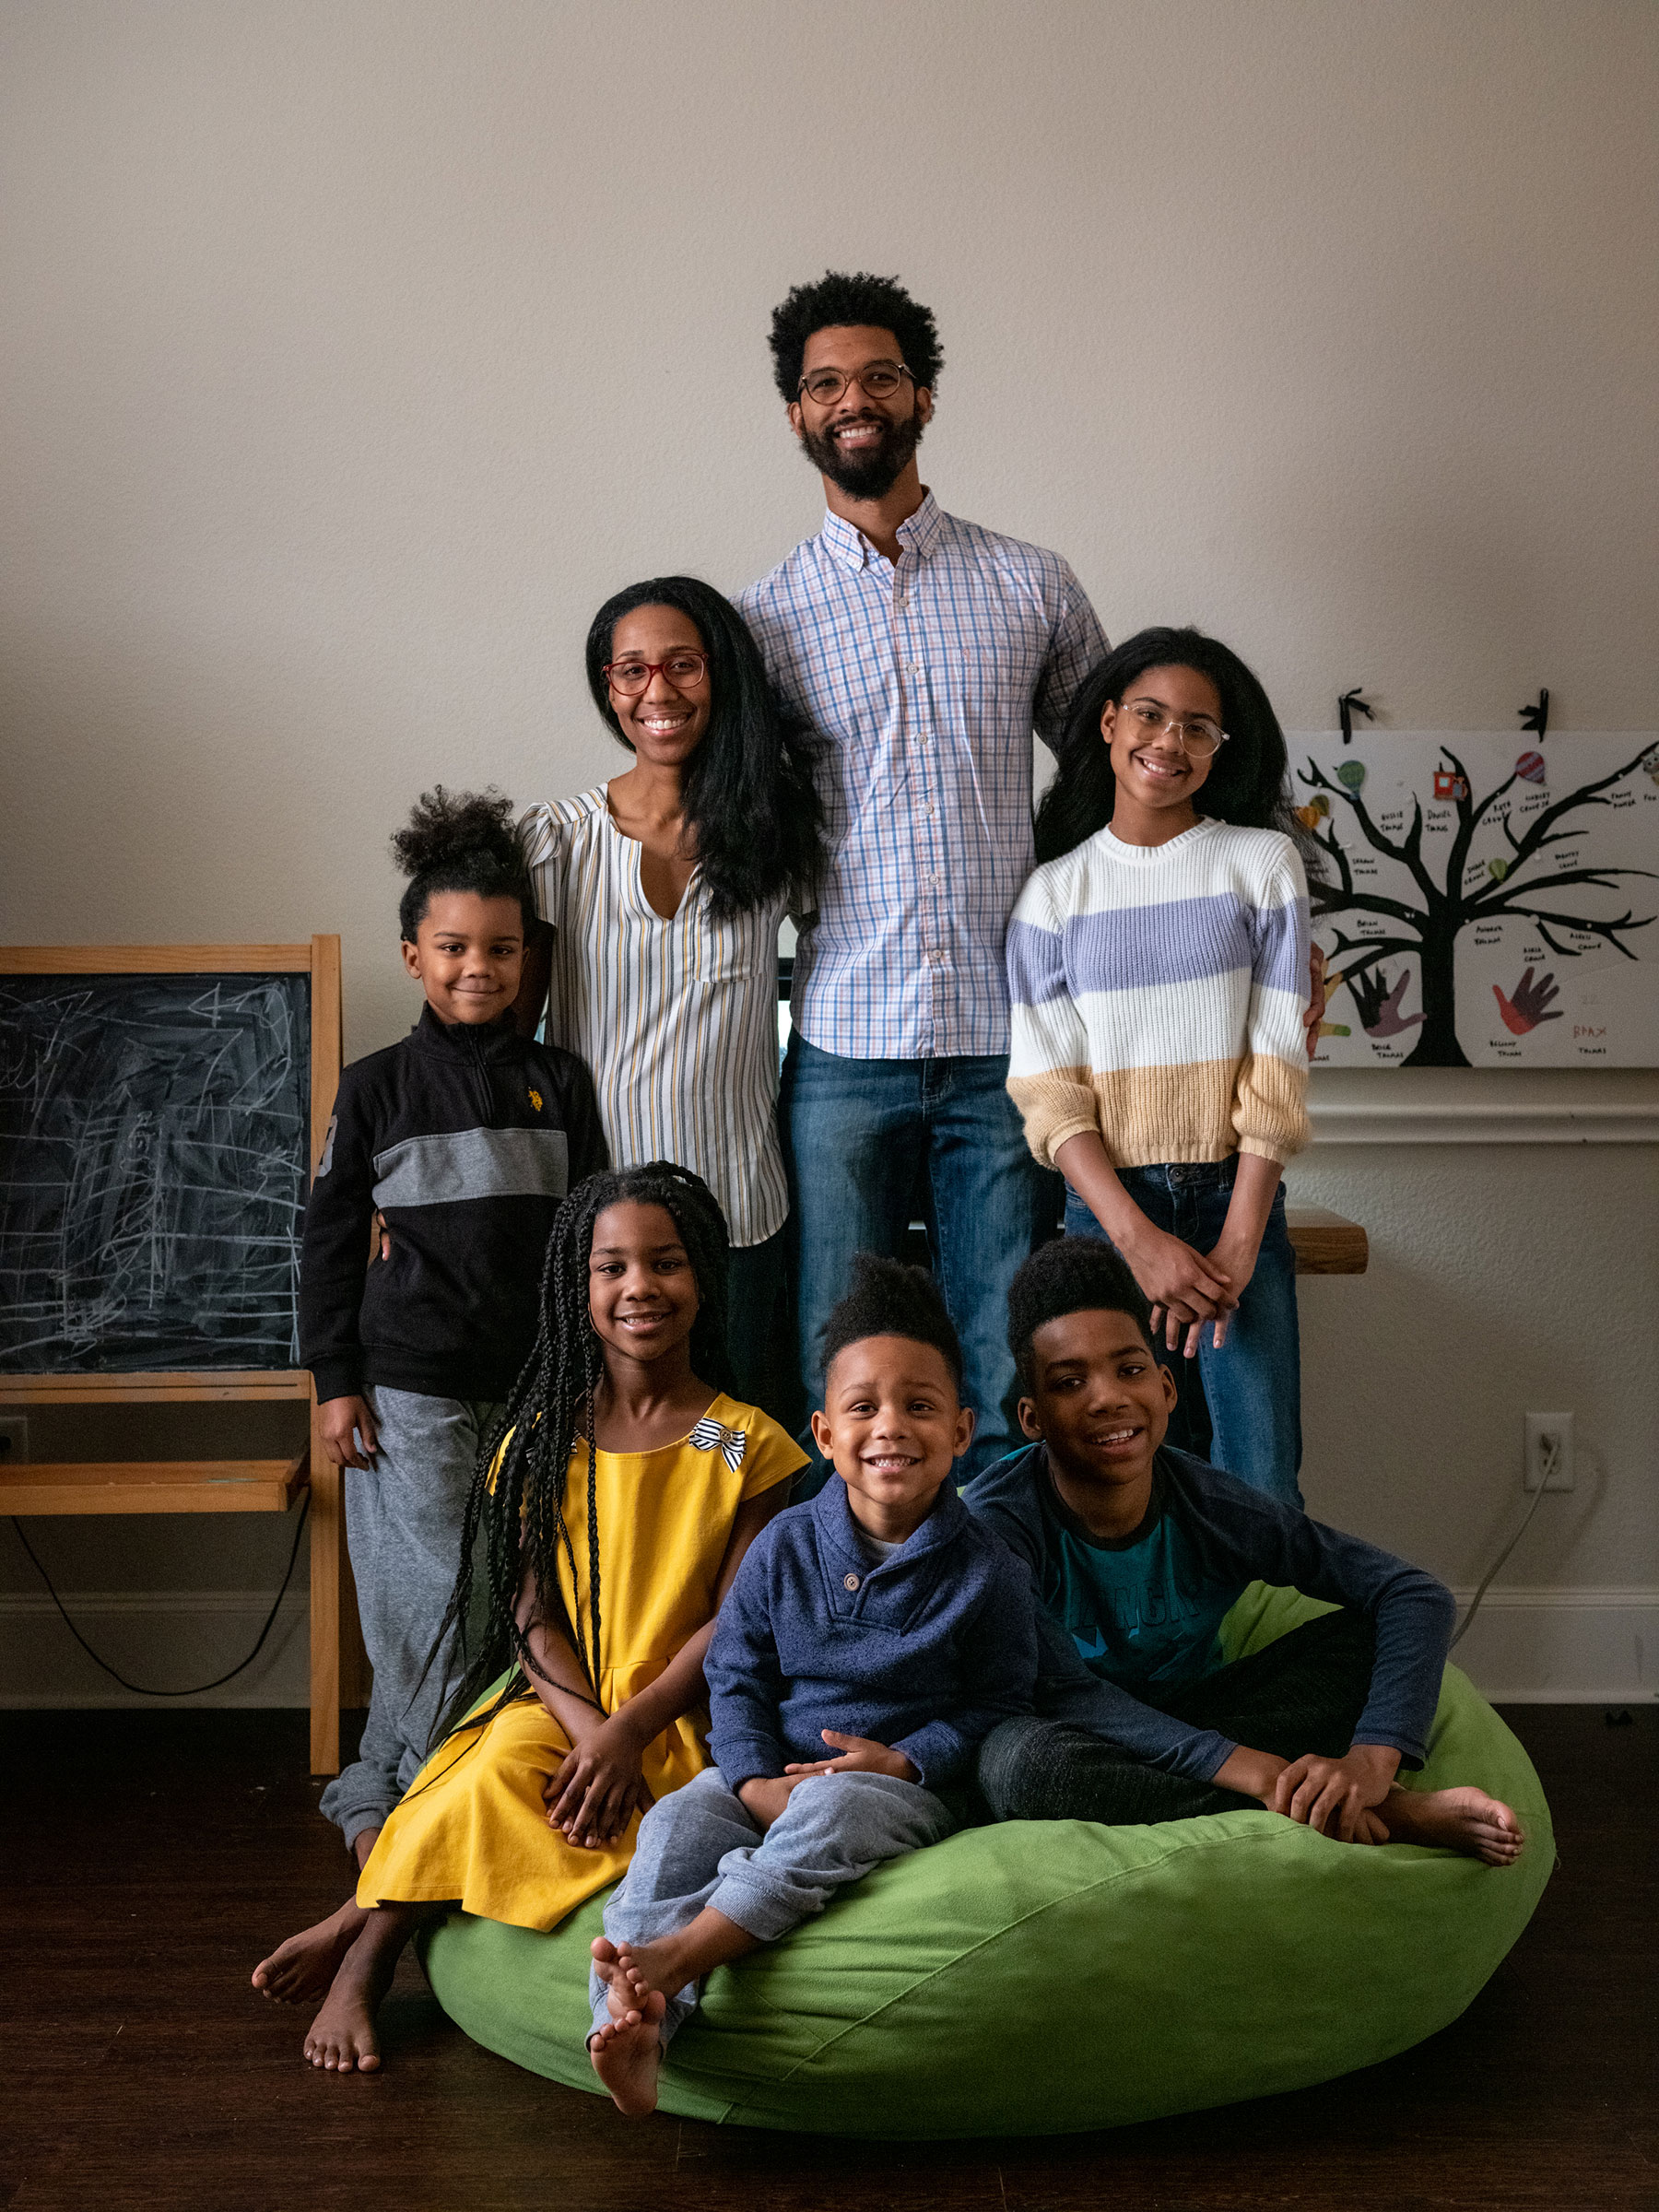 RICHARDSON, TEXAS - February 23, 2022: The Thomas family poses for a portrait in their home in Richardson, Texas. (Clockwise from left: Brax, 6; Andrea; Brian; Brea, 12; Brice, 10; Blaine, 4; and Bellamy, 8). Ilana Panich-Linsman for TIME